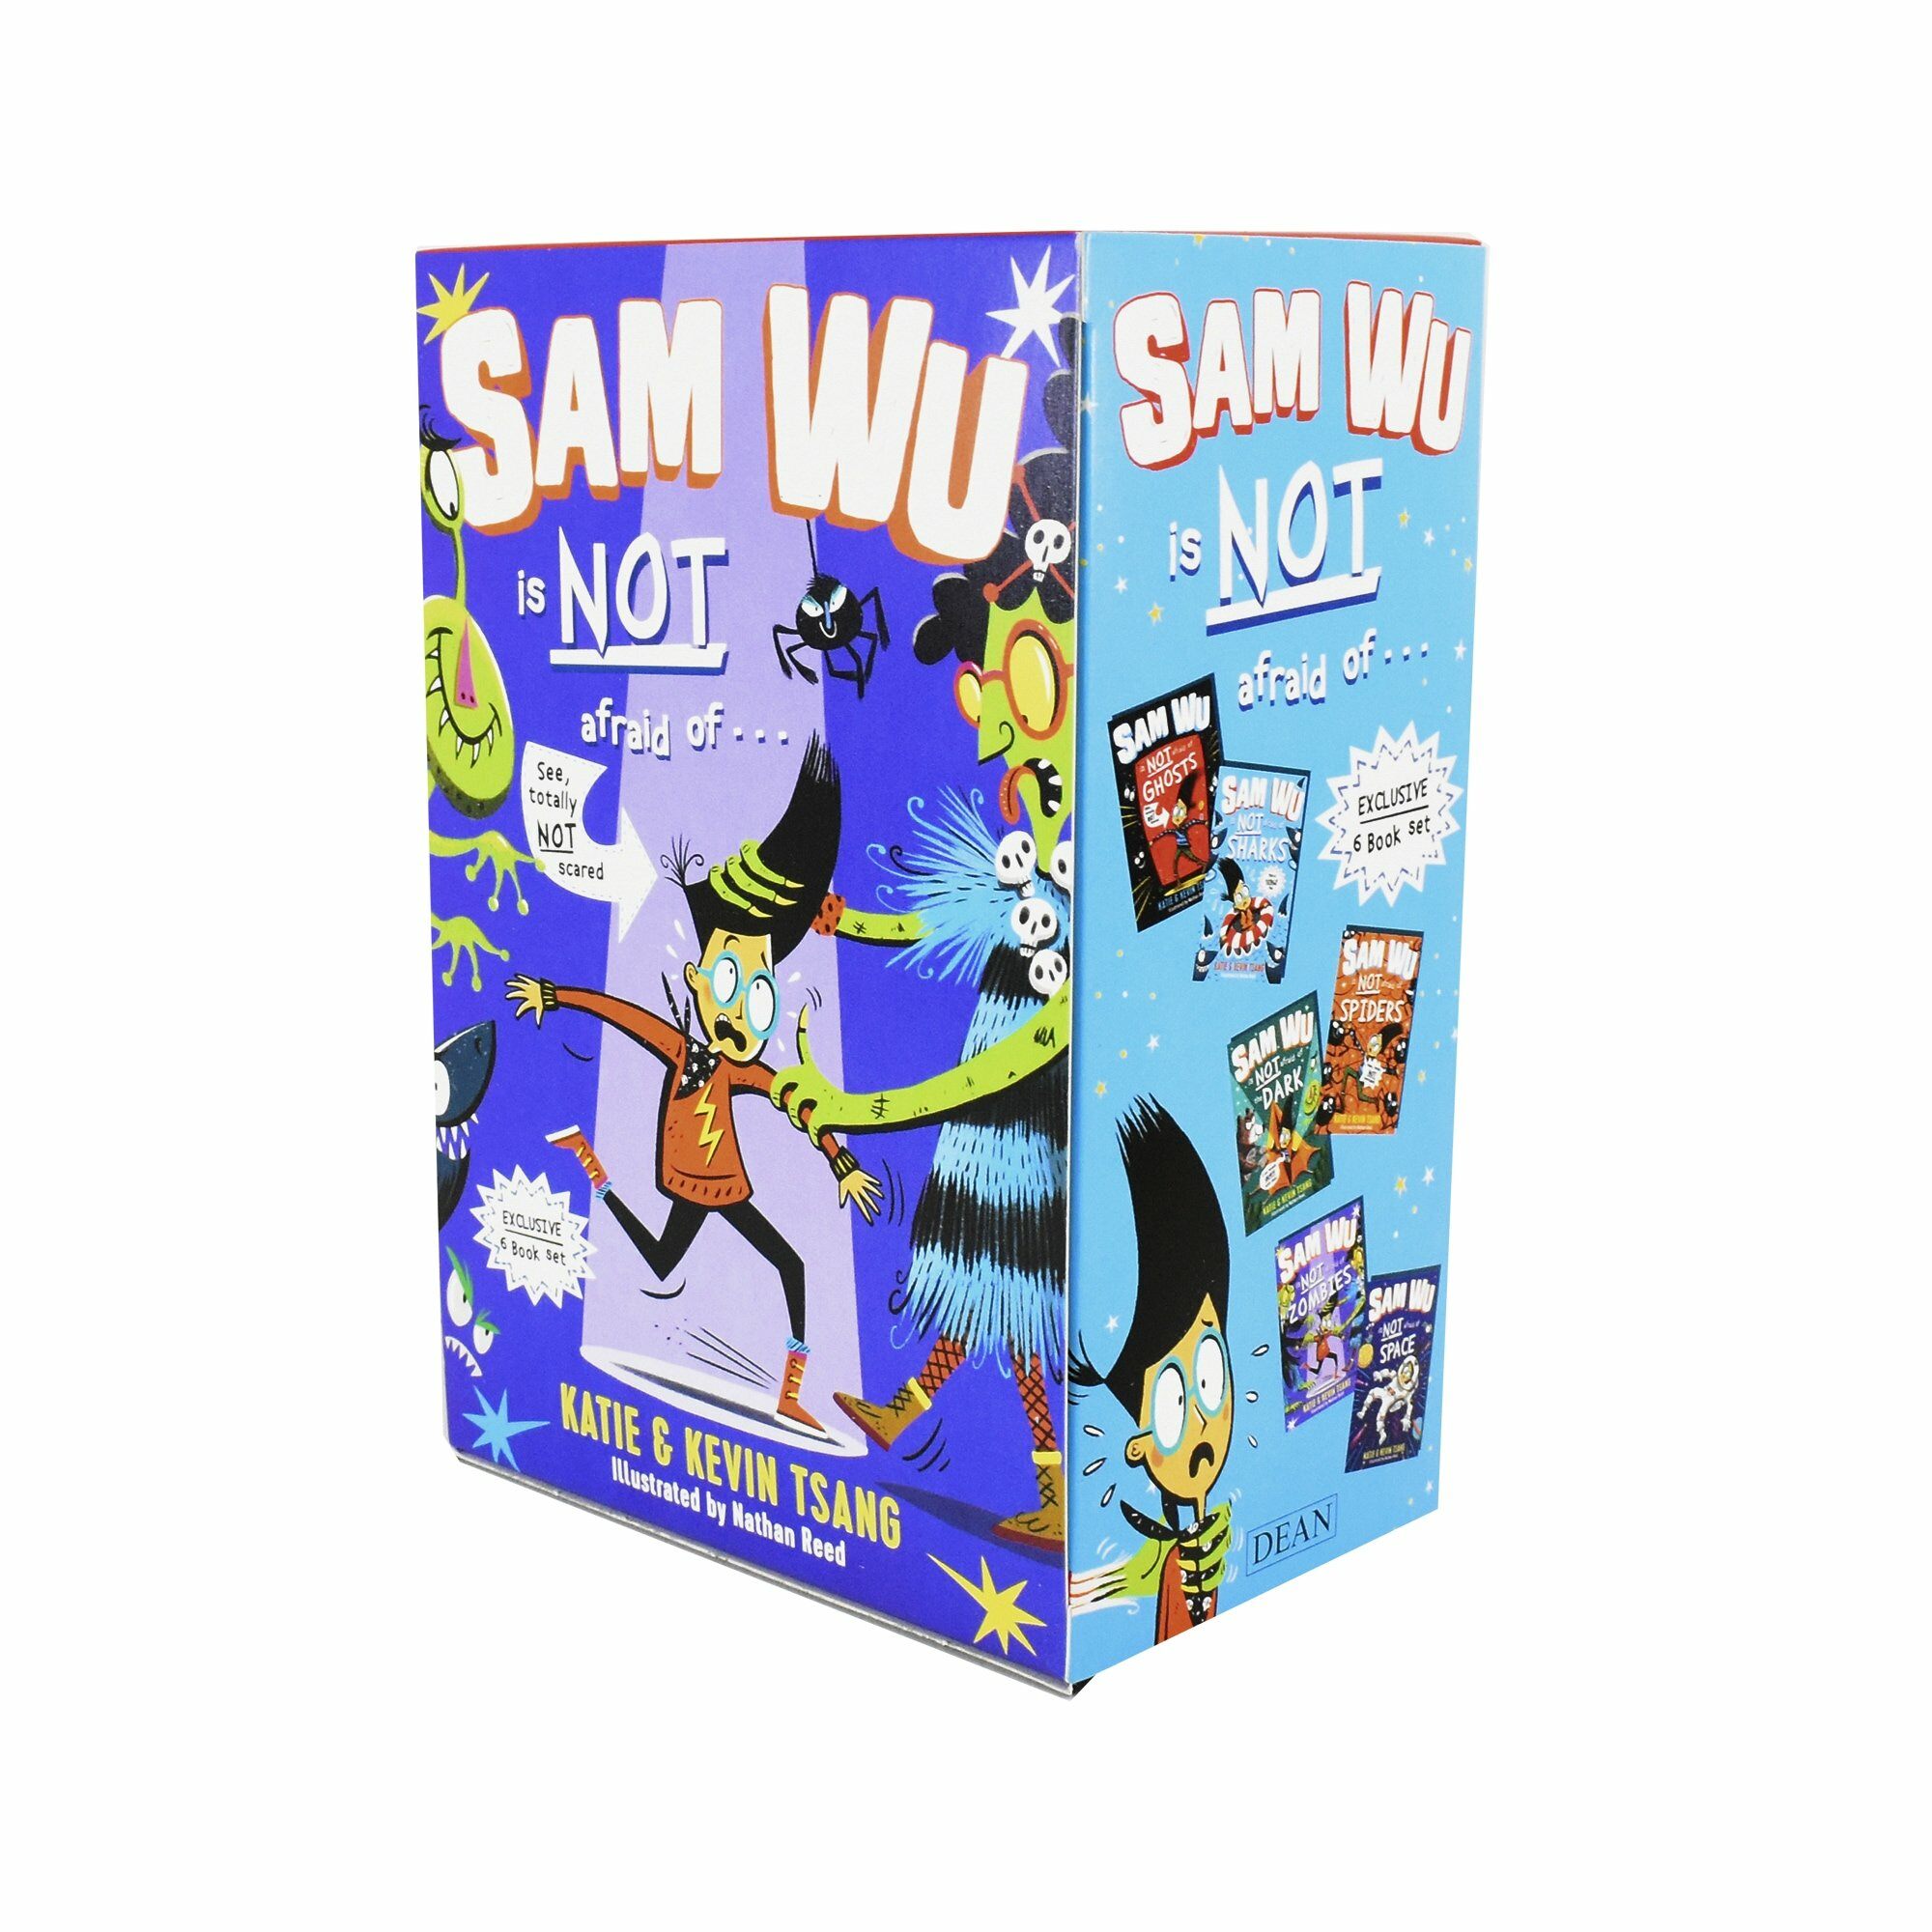 Sam Wu Is NOT Afraid Of Series 6 Books Collection Box Set (Papearback 6권)